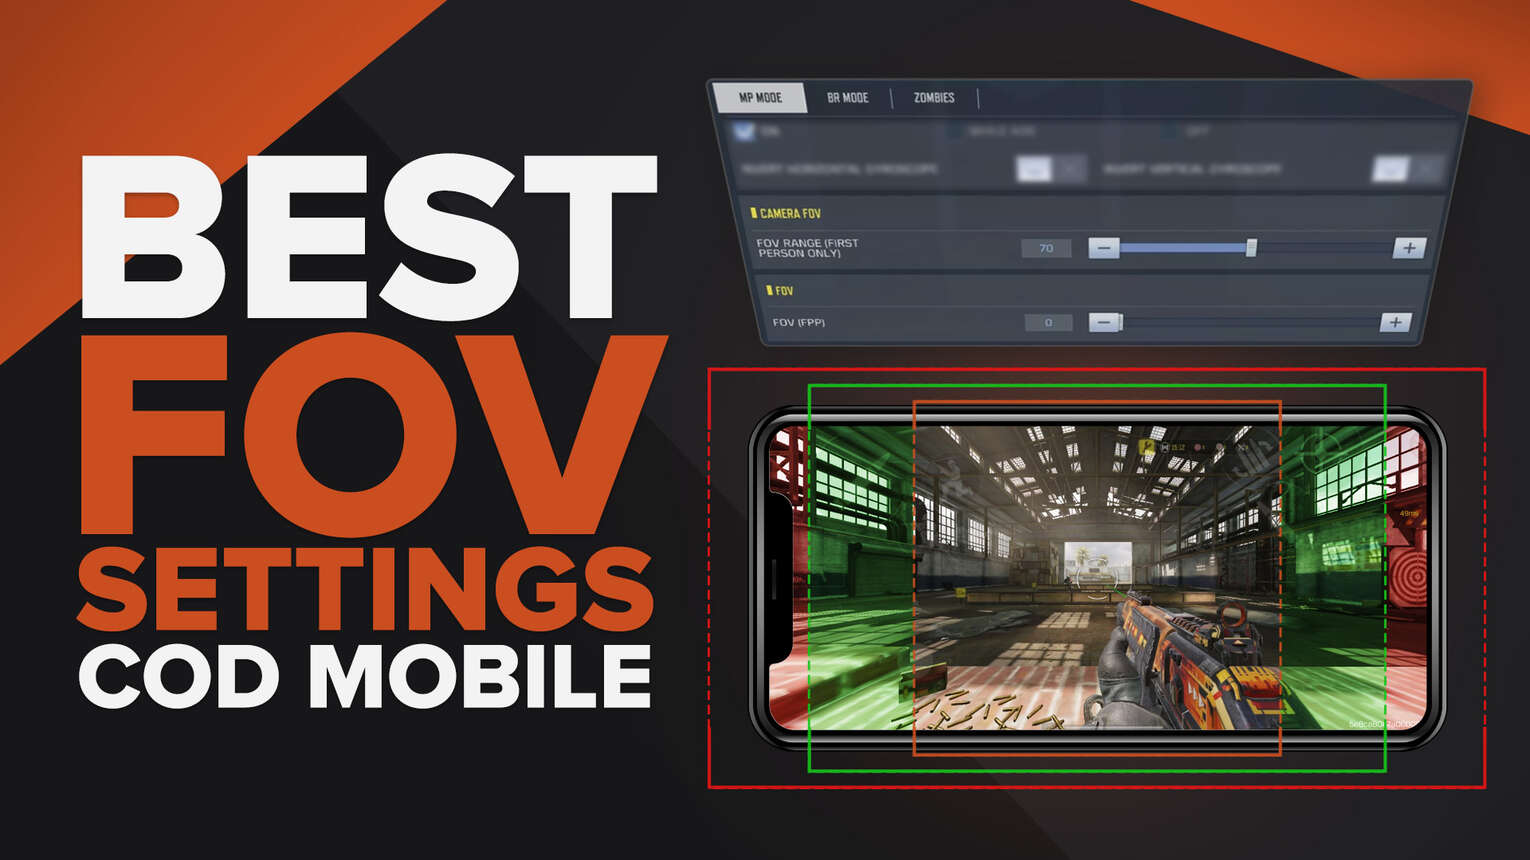 3 Best FOV Settings to Use in Call of Duty Mobile